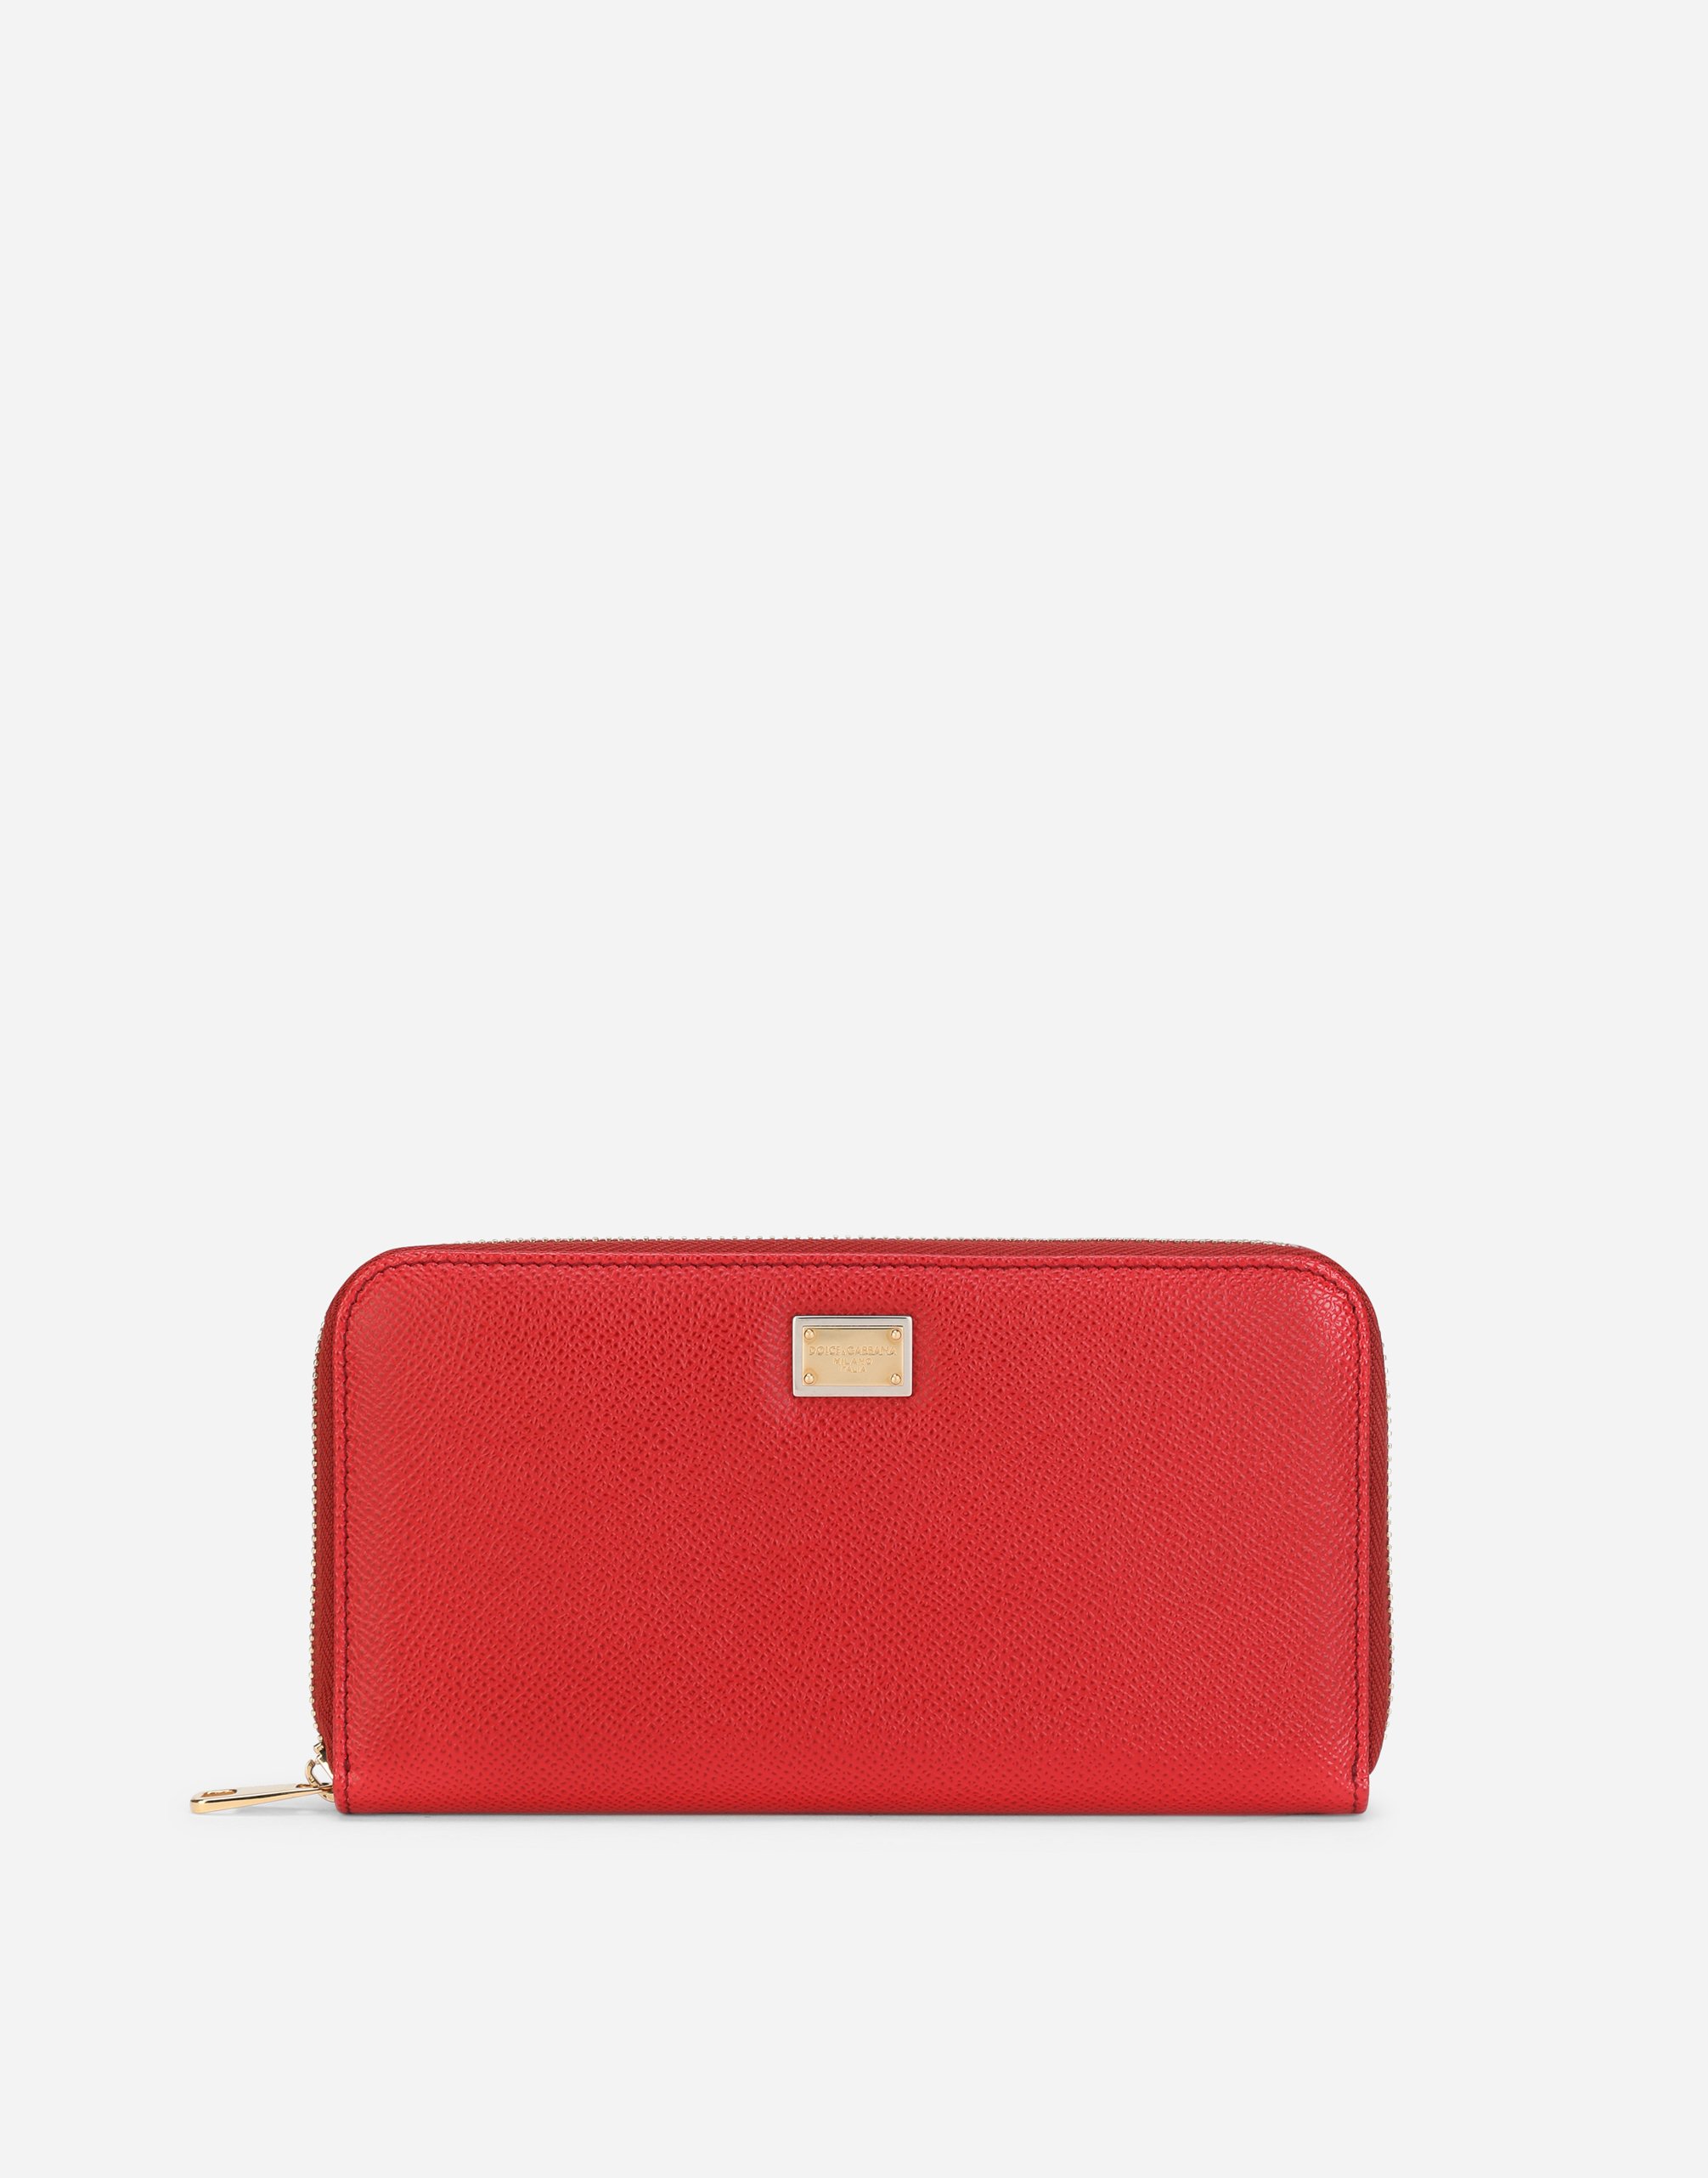 Dauphine leather zip-around wallet in Red